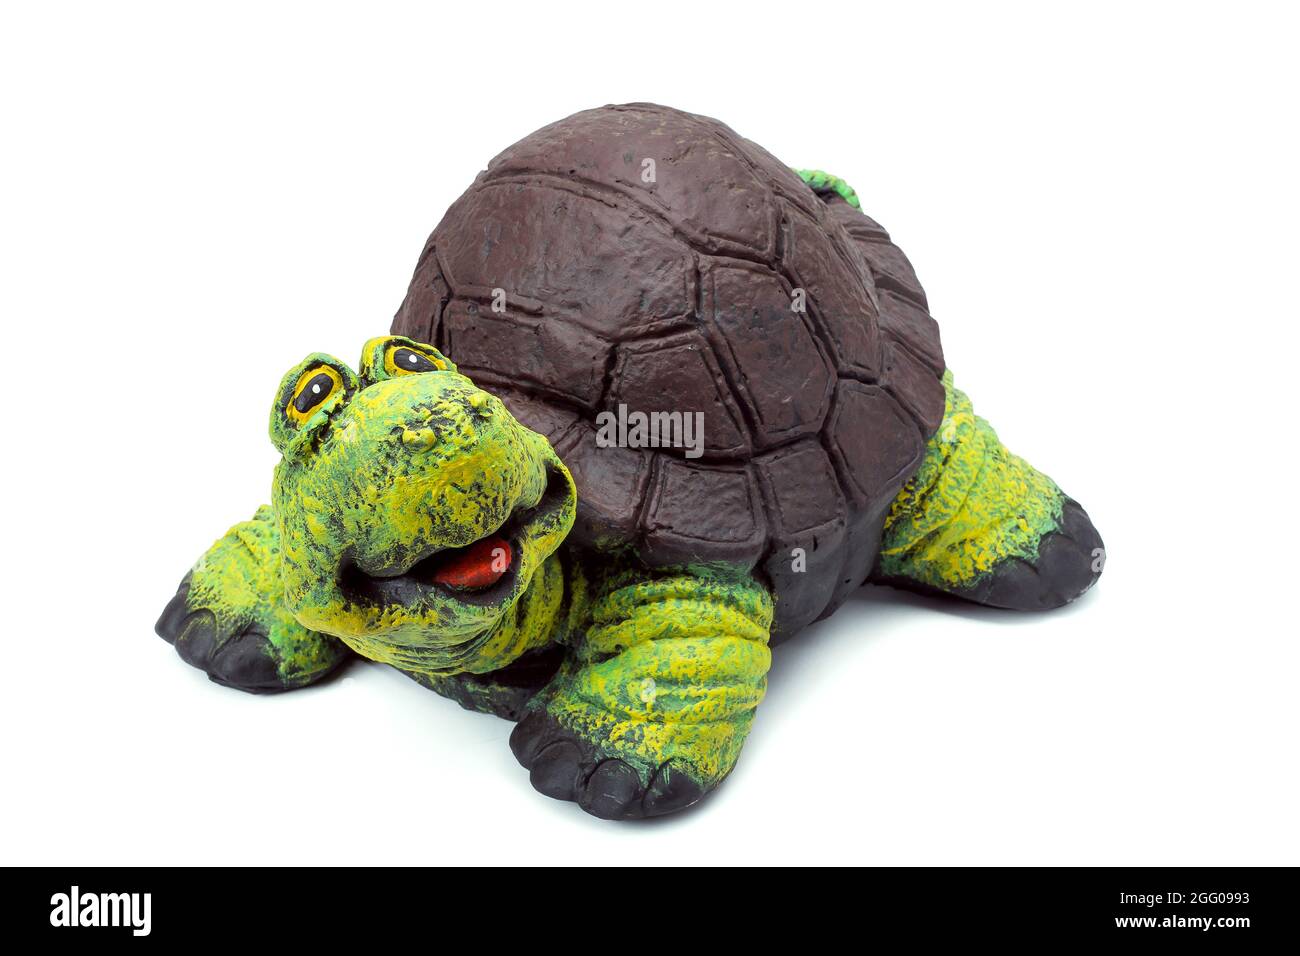 Concrete garden figure painted with colored paints, landscape object in the form of a cheerful turtle with a brown shell and a green head isolated on Stock Photo